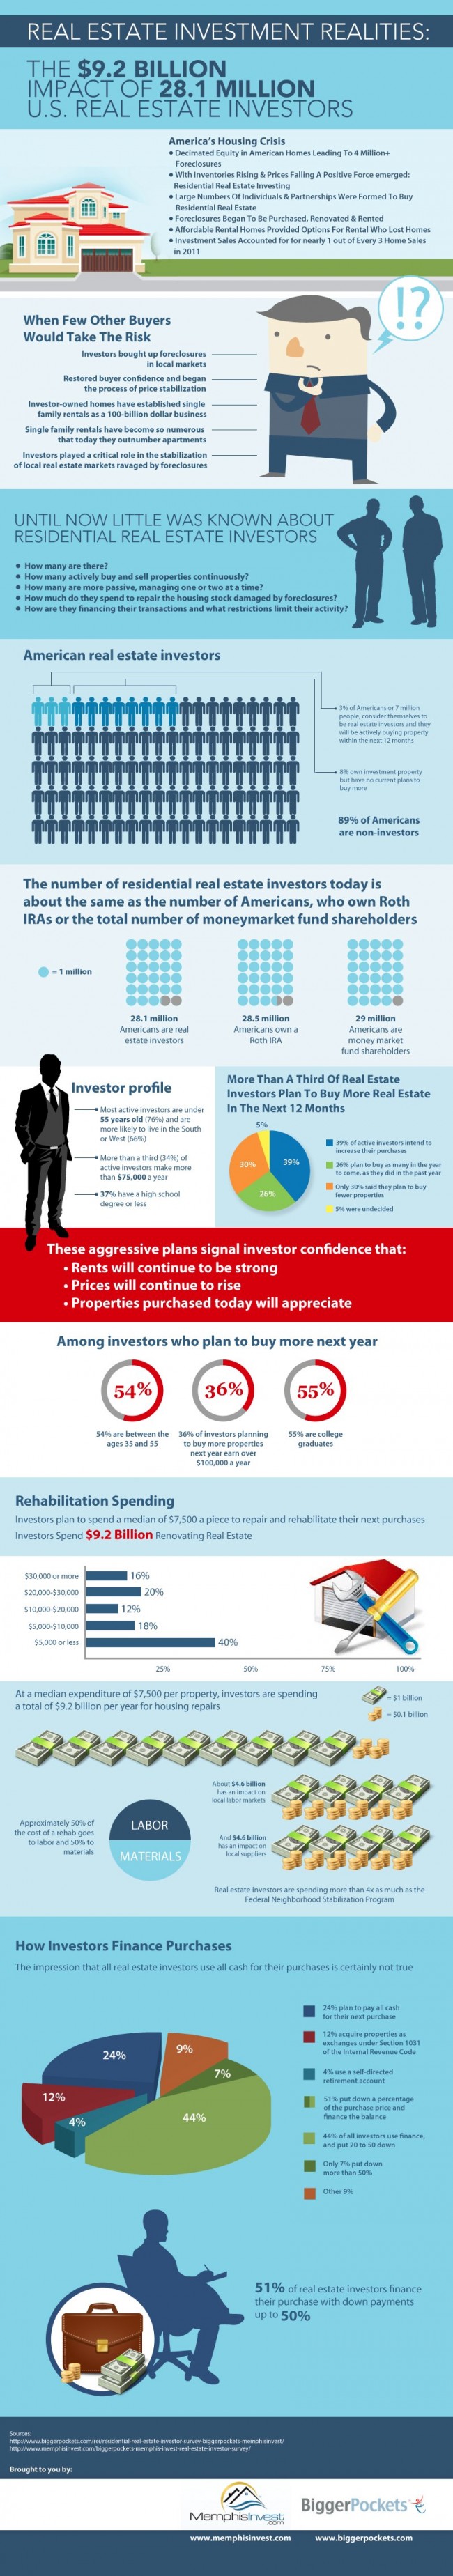 Real estate investment realities